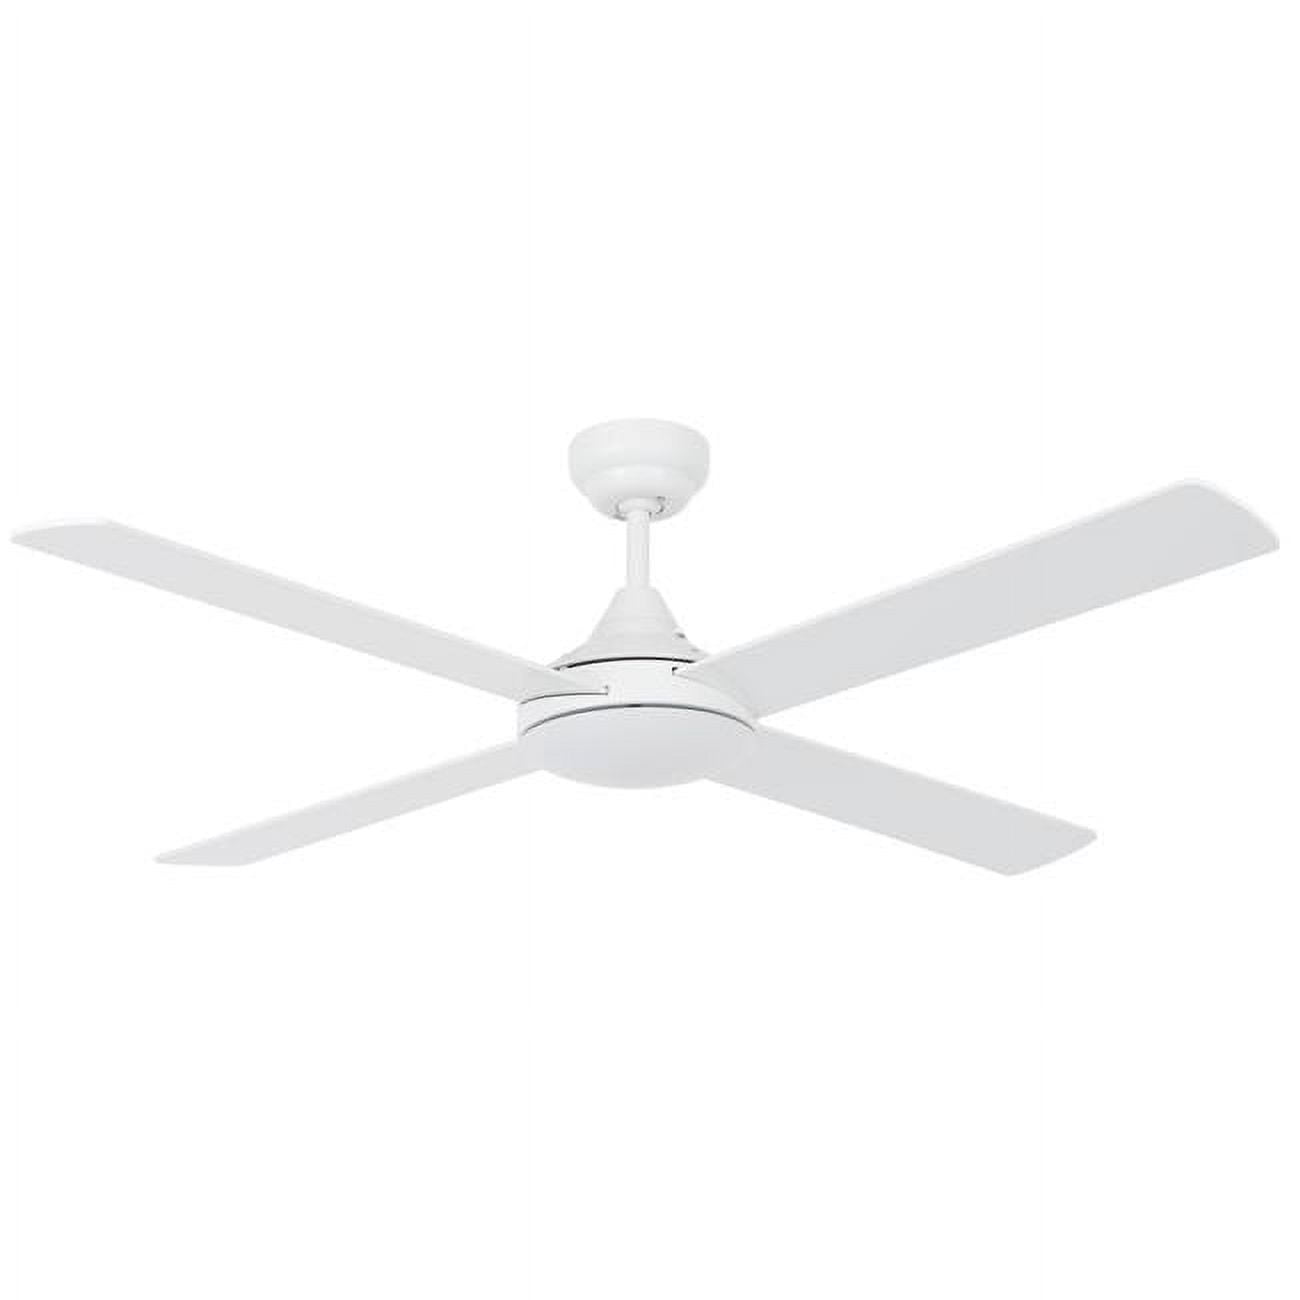 Picture of Lucci Air 21296201 52 in. Airlie II White Remote Ceiling Fan